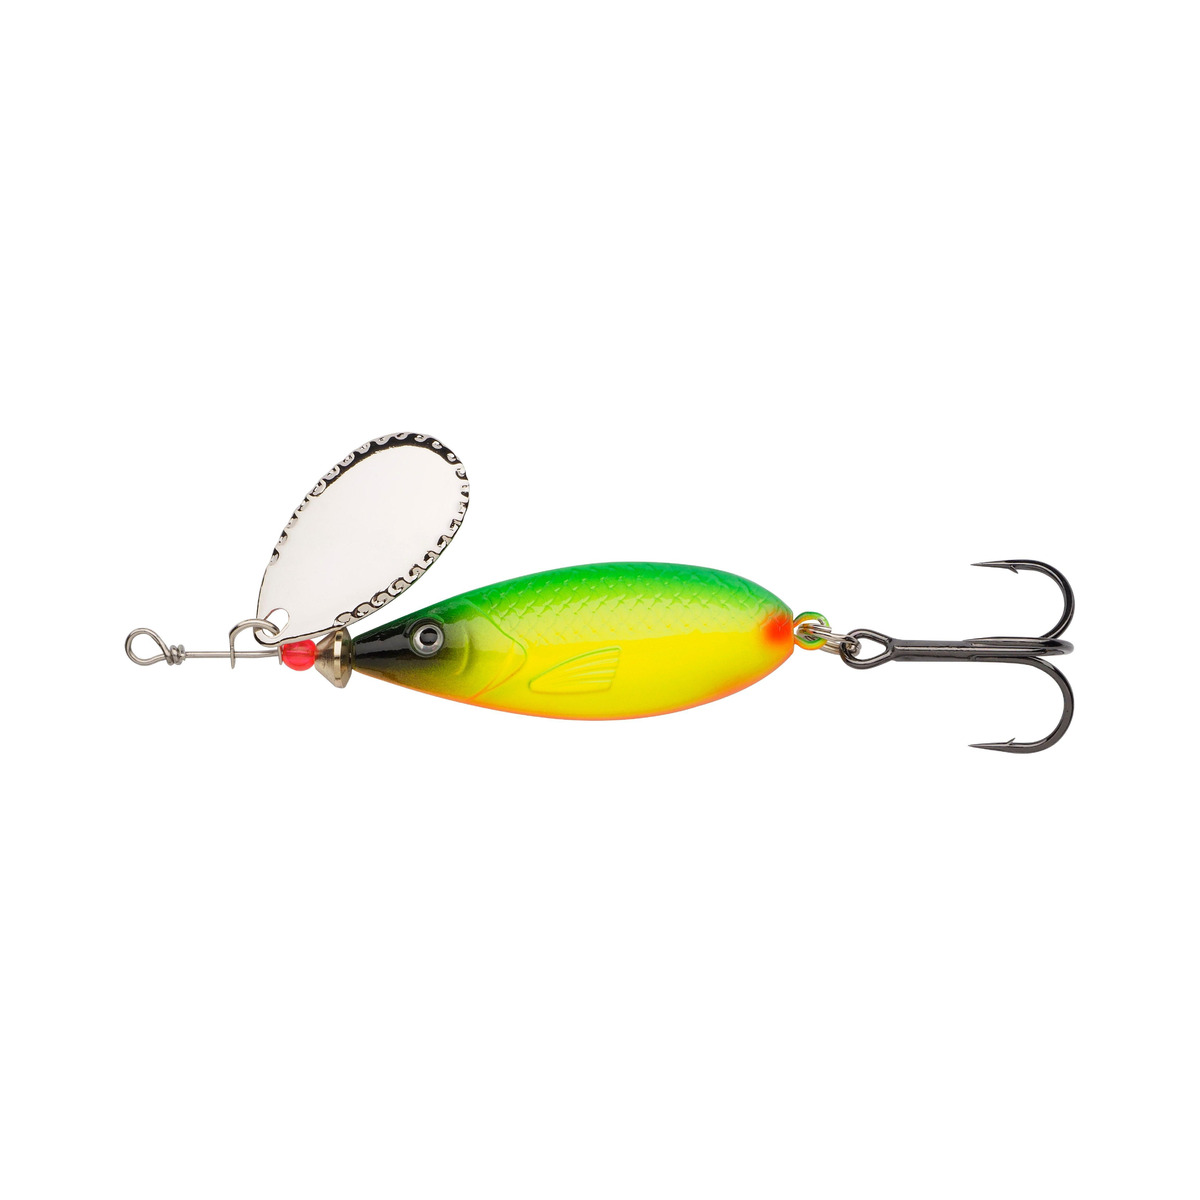 Abu Garcia Droppen Maxi Spinners 12 G - Chartreuse Green - 85 mm